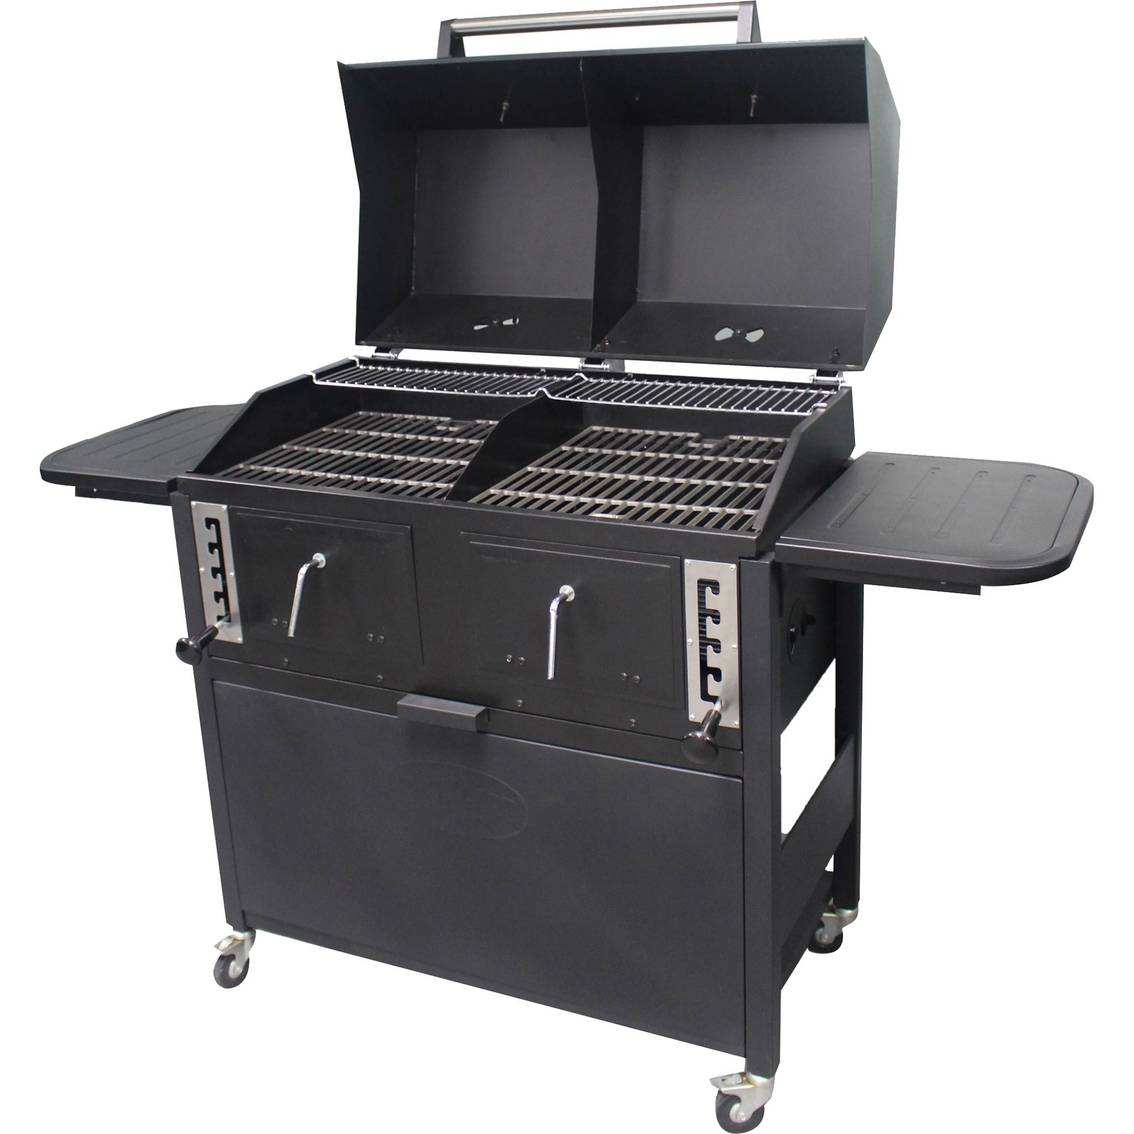 GrillSmith Rawhide Dual Zone Charcoal Grill - Image 2 of 7